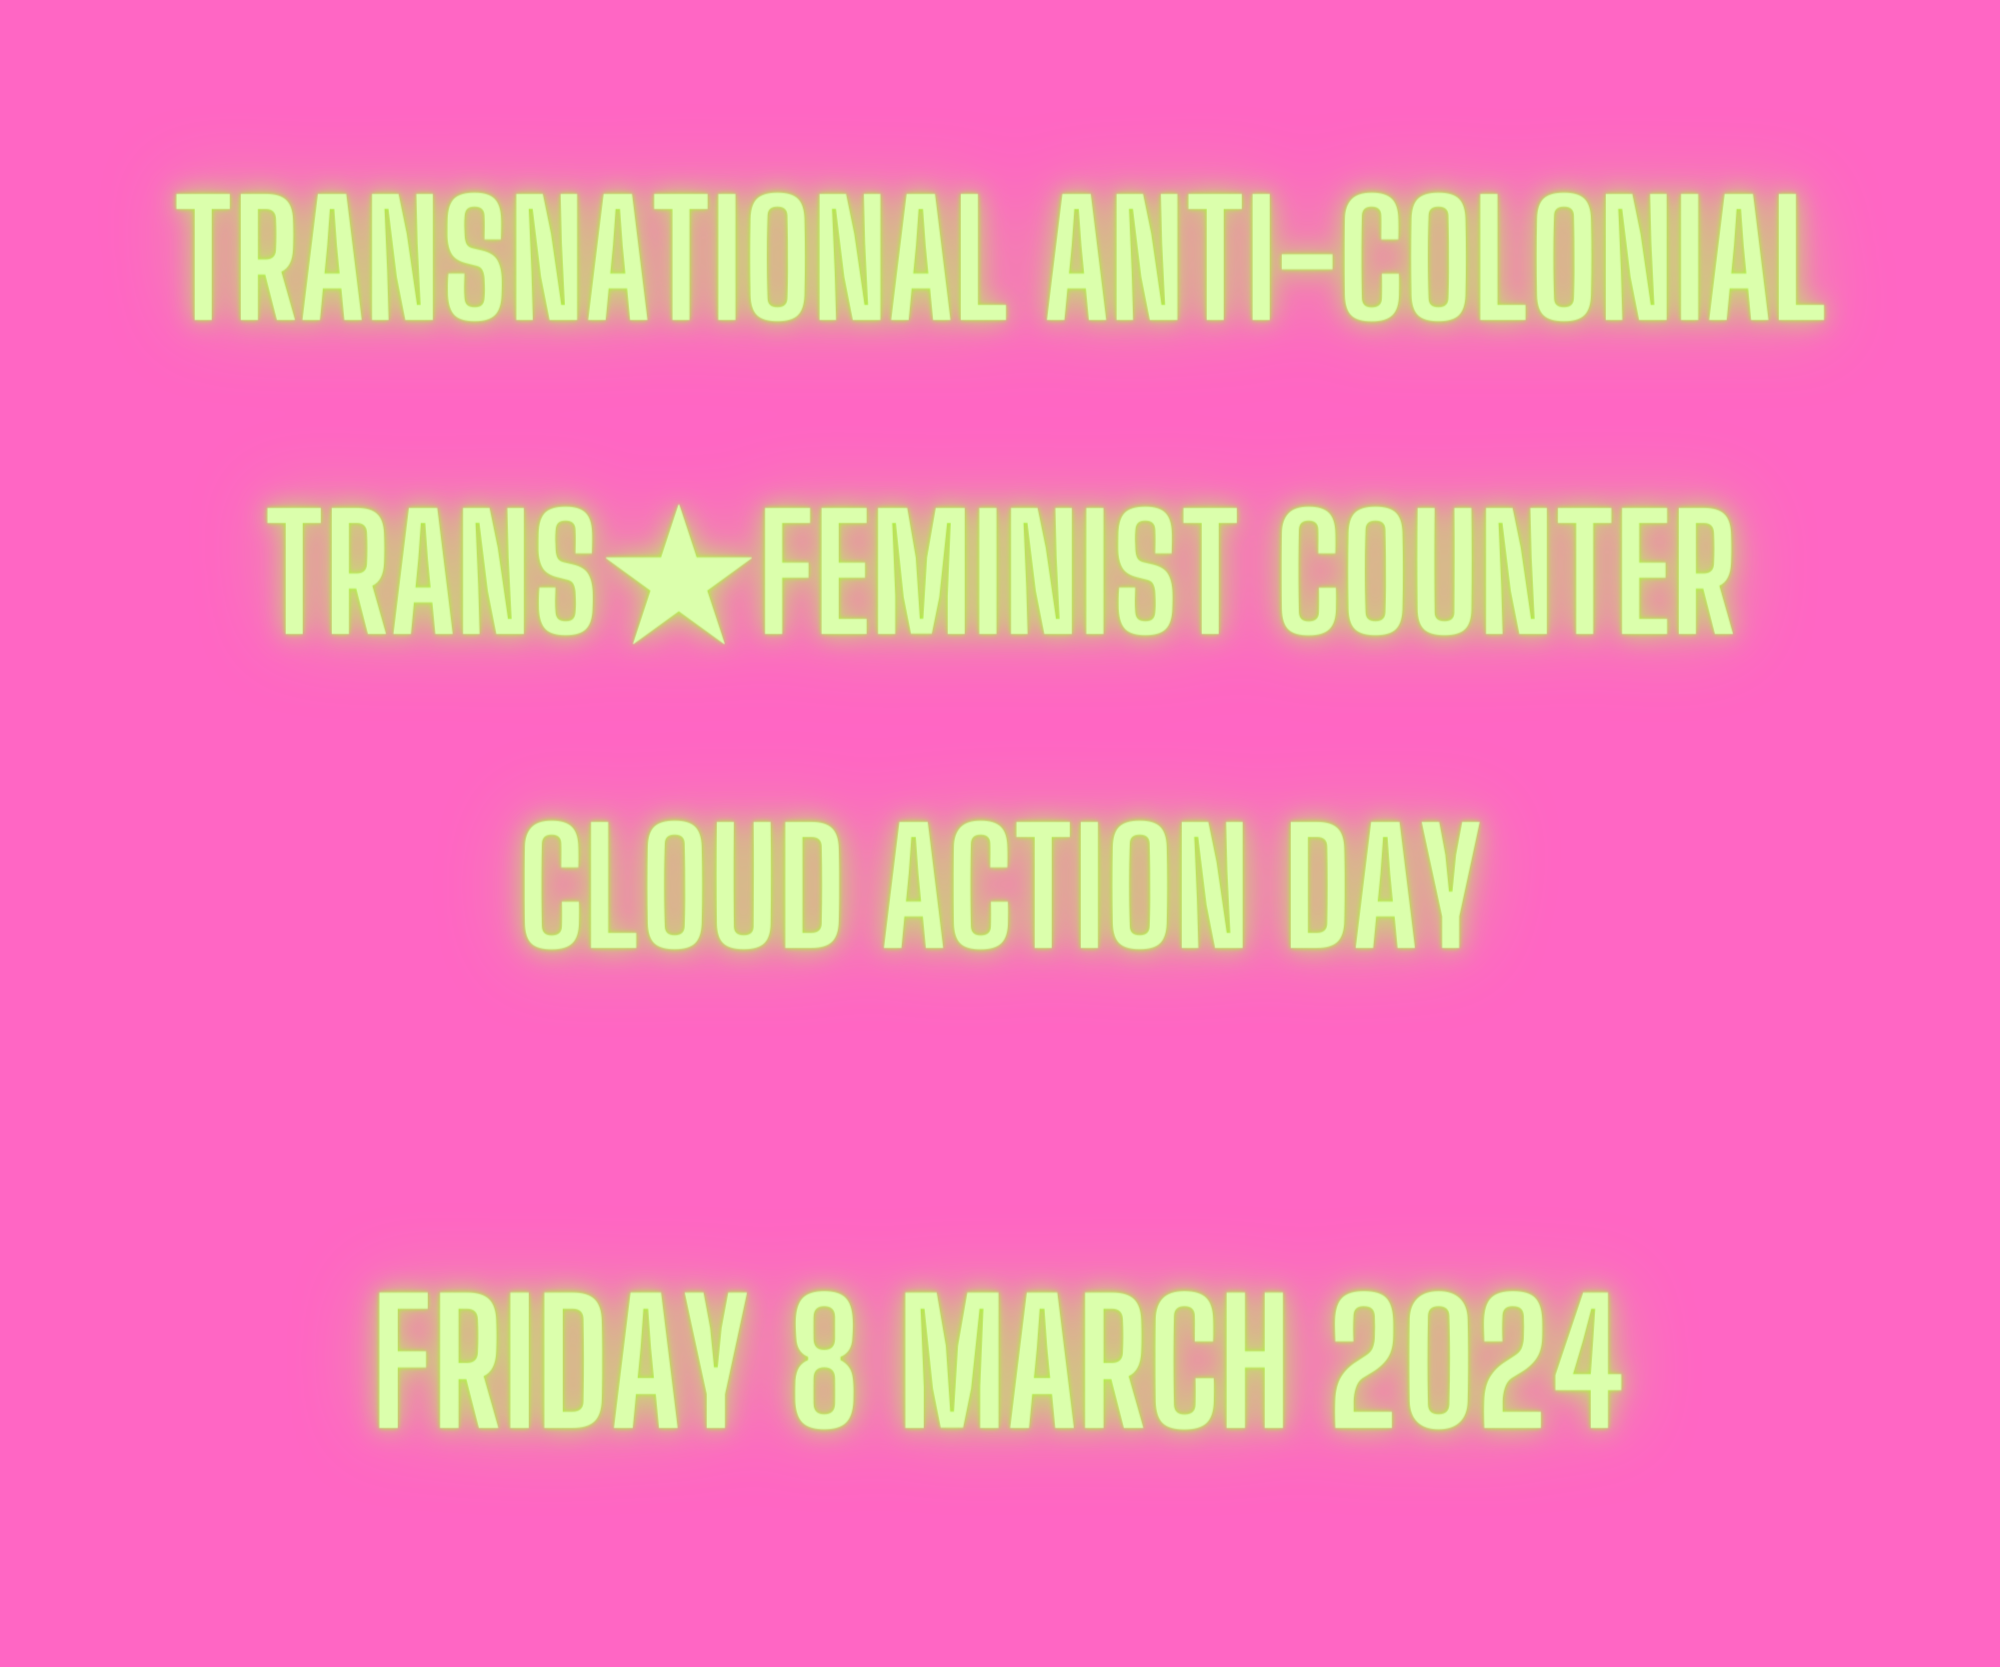 text based image says - TRANSNATIONAL ANTI-COLONIAL TRANS★FEMINIST COUNTER CLOUD ACTION DAY Friday 8 March 2024